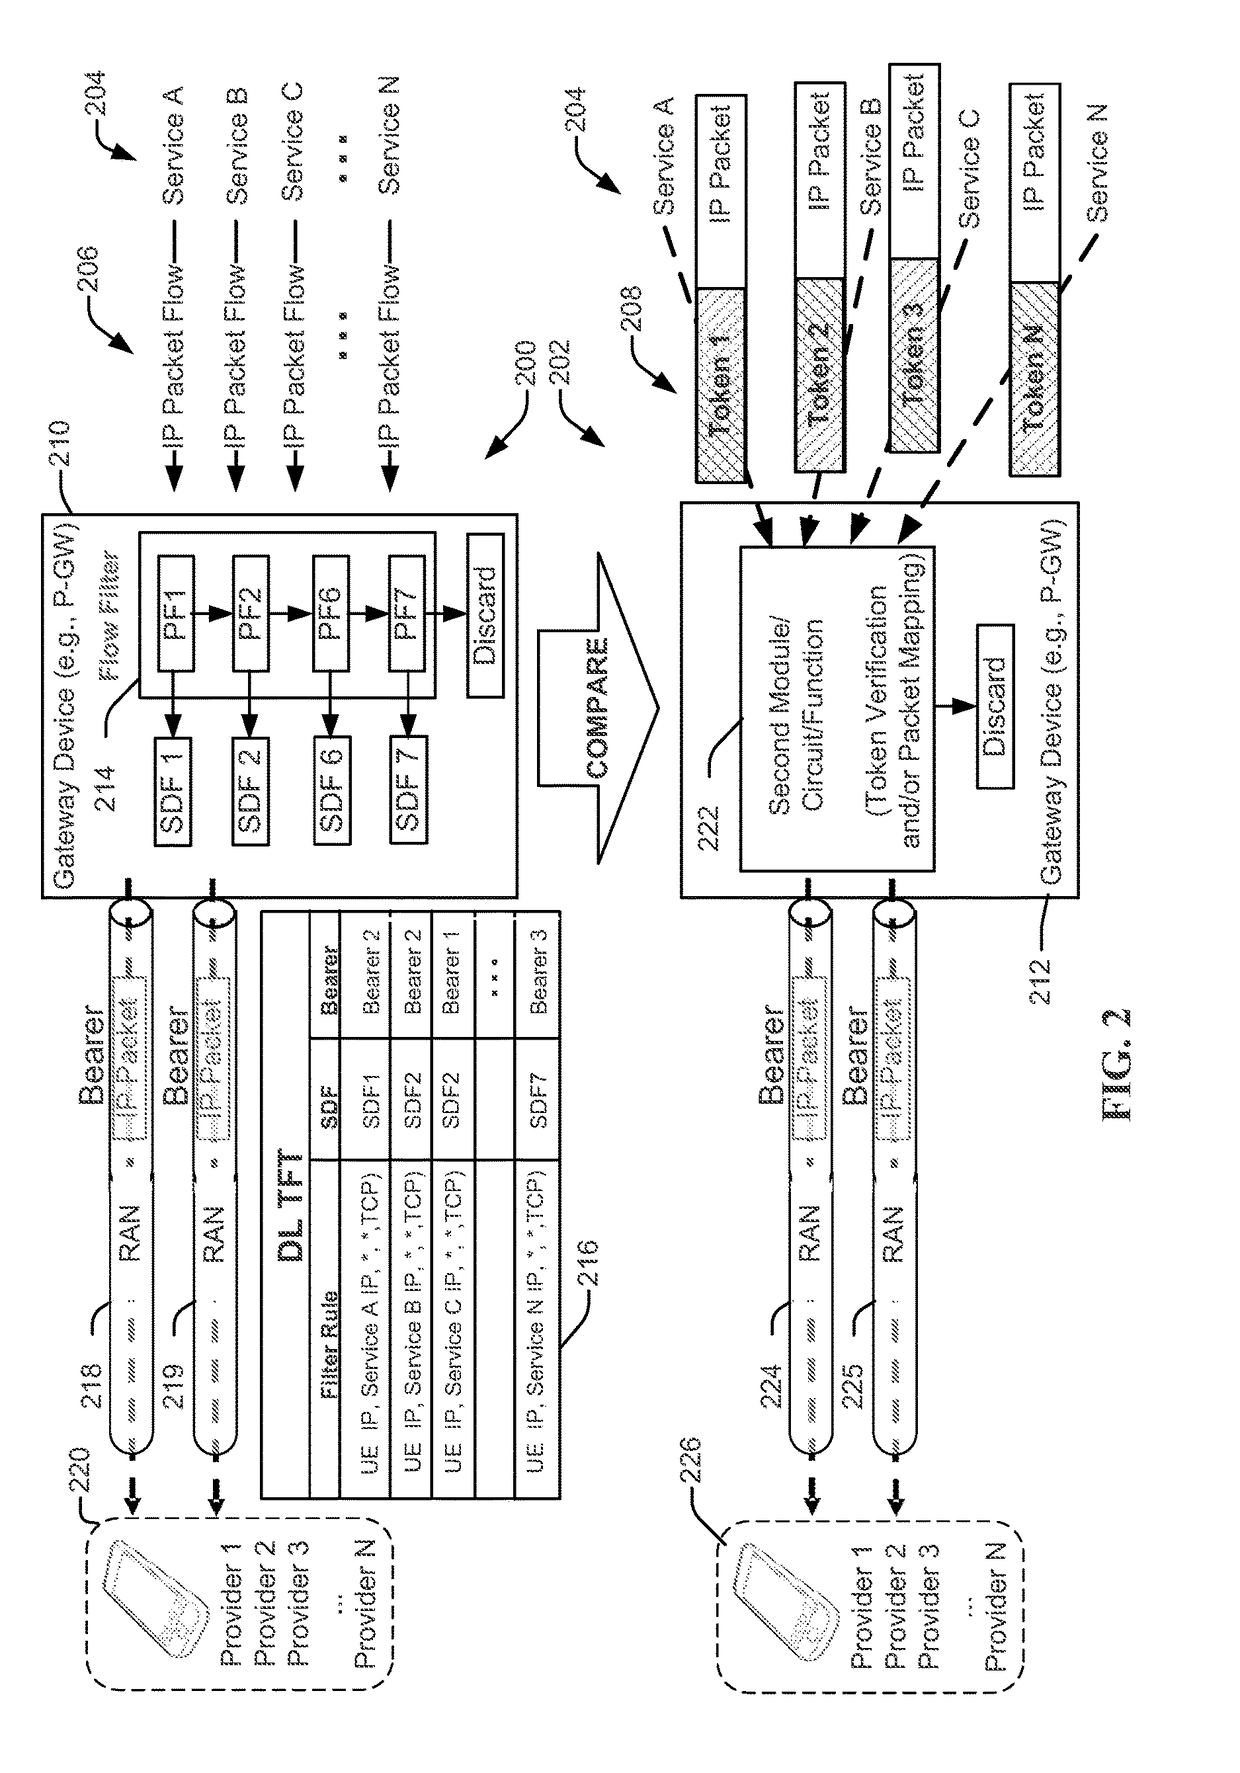 In-flow packet prioritization and data-dependent flexible QOS policy